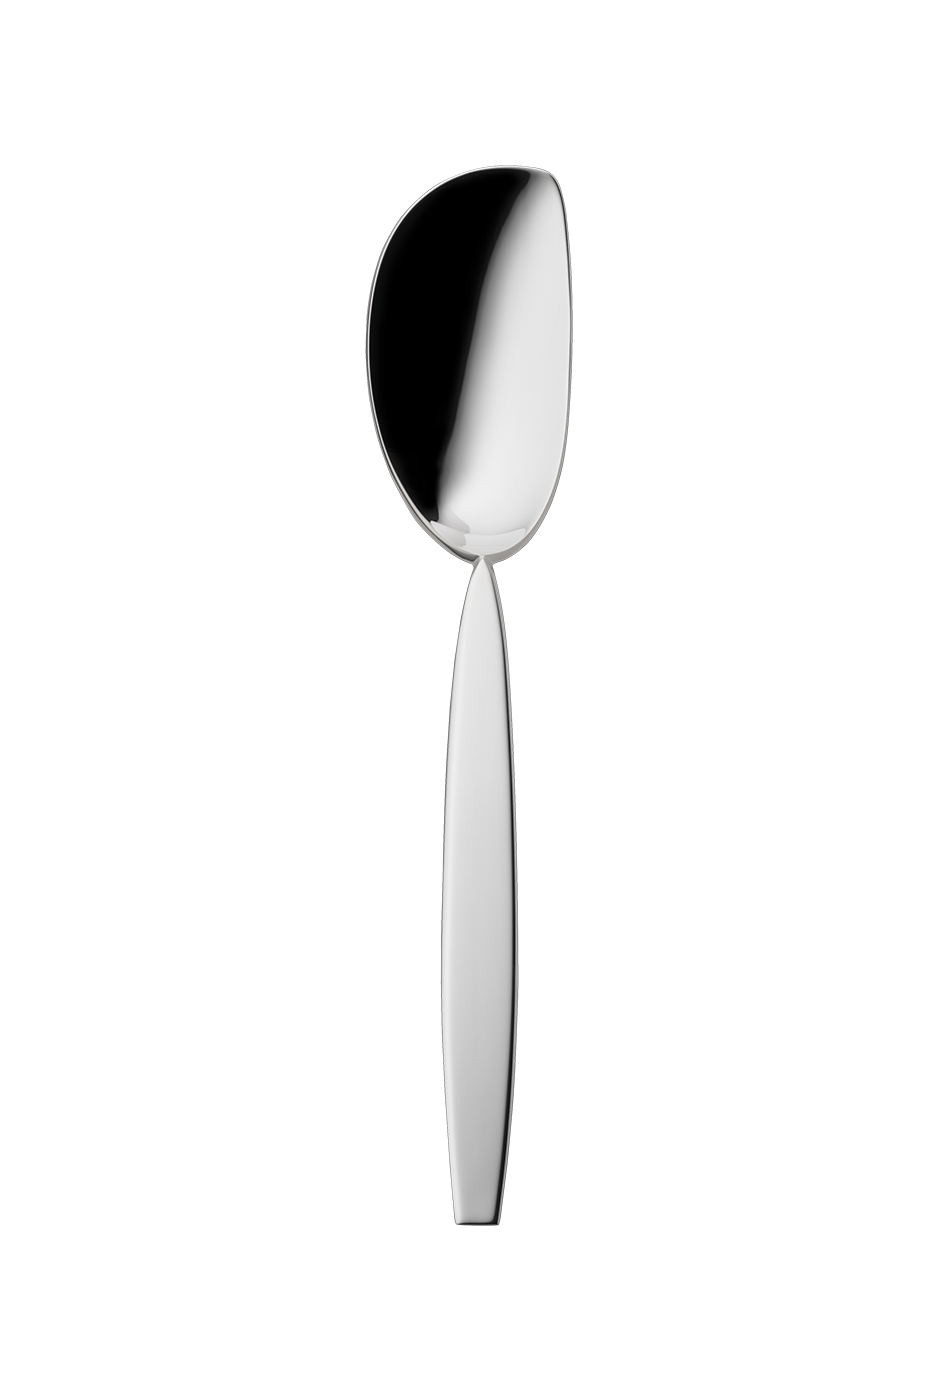 12" Gourmet Spoon (150g massive silverplated)